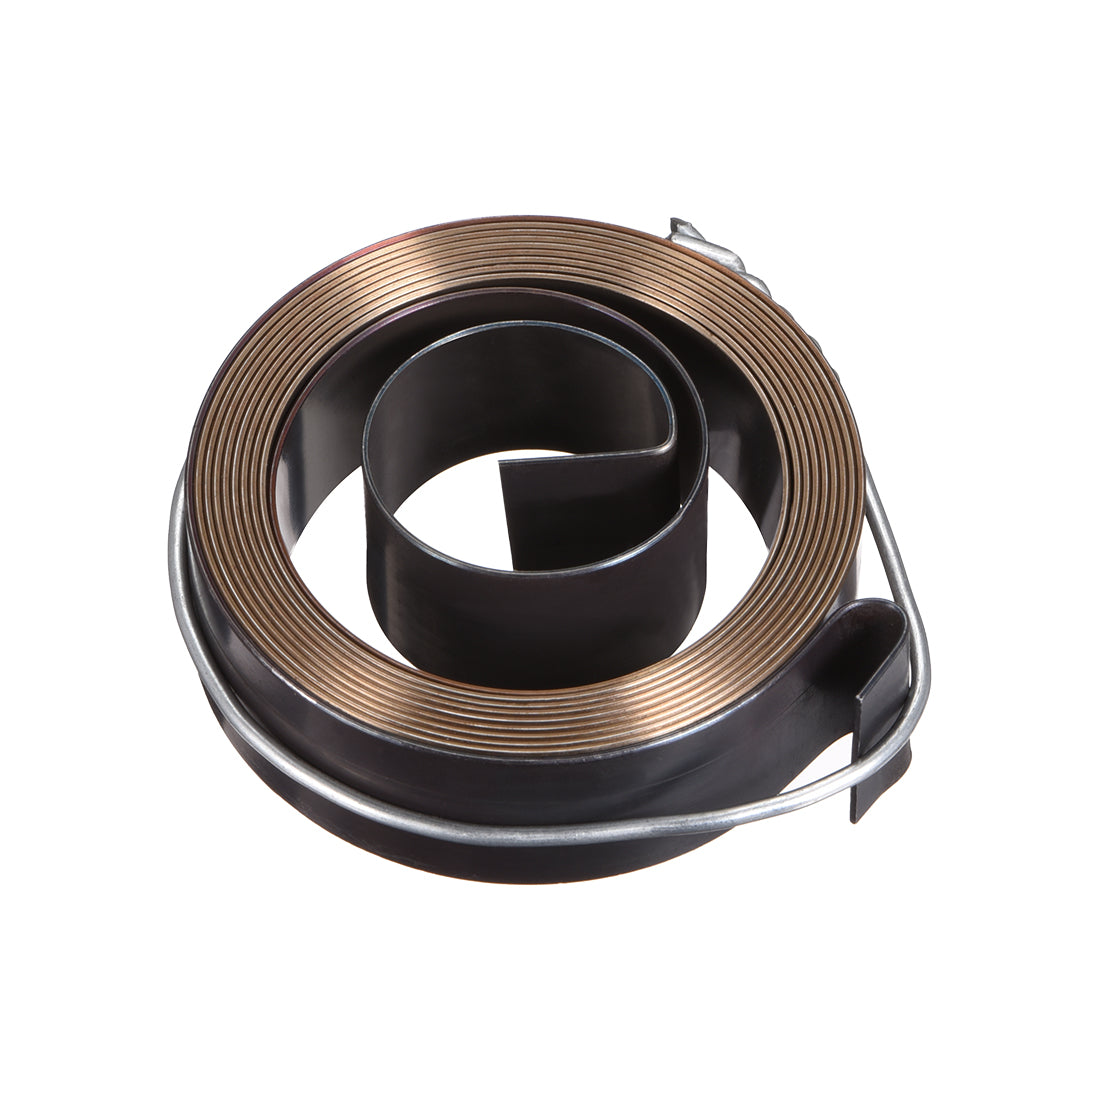 Uxcell Uxcell Drill Press Spring Quill Feed Return Coil Spring Blackening 1540mm 54x8x0.8mm